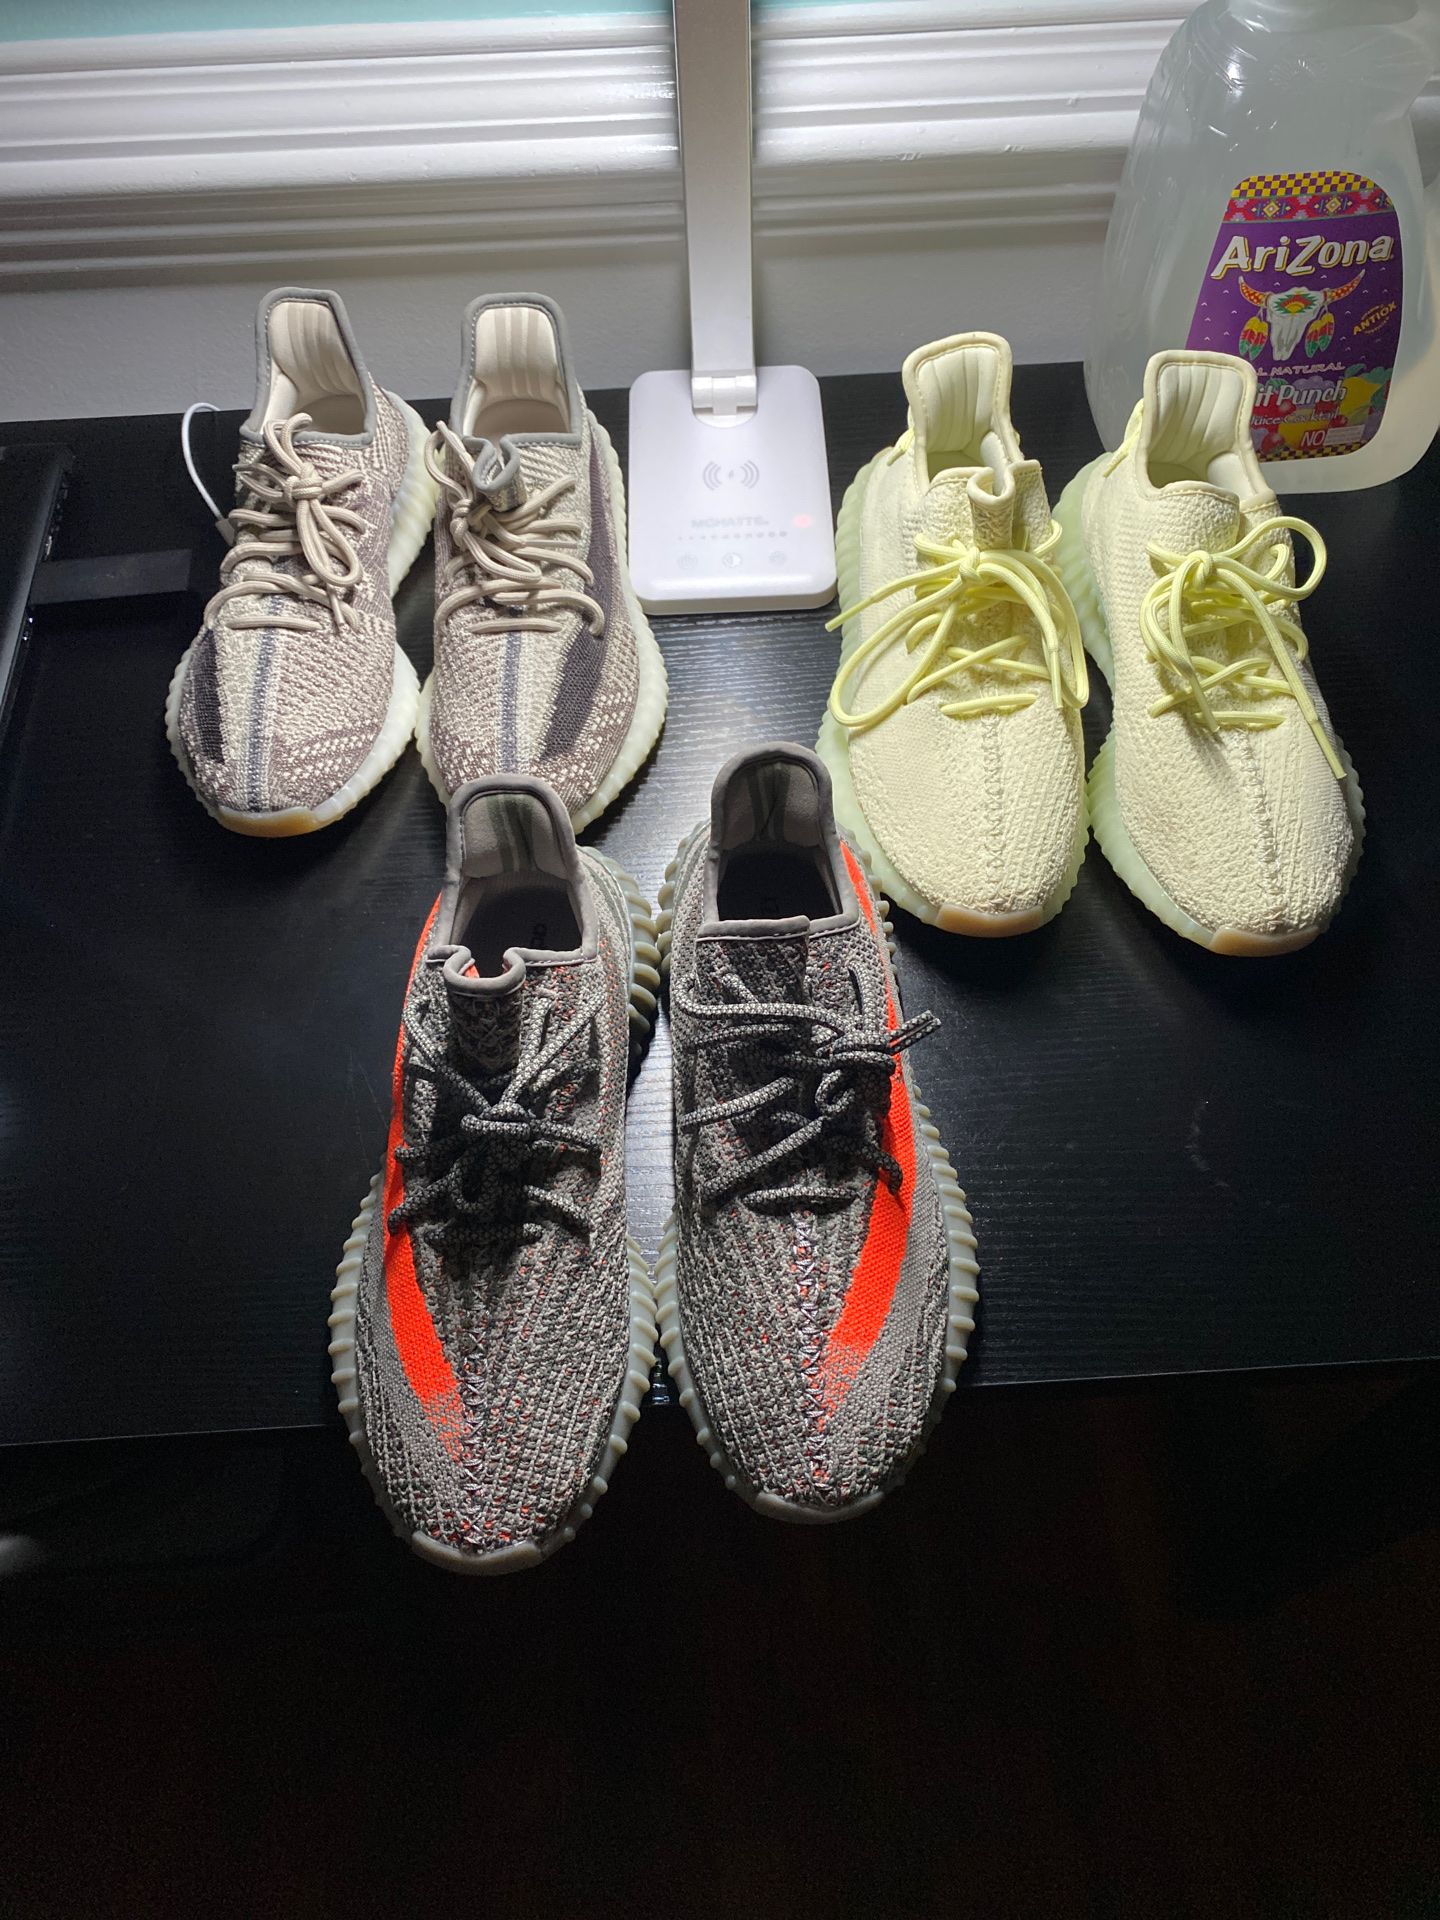 3 pairs of yeezys (Zyon’s 8.5 new) (Beluga’s 9.0 new) (Butter’s 9.0 used)